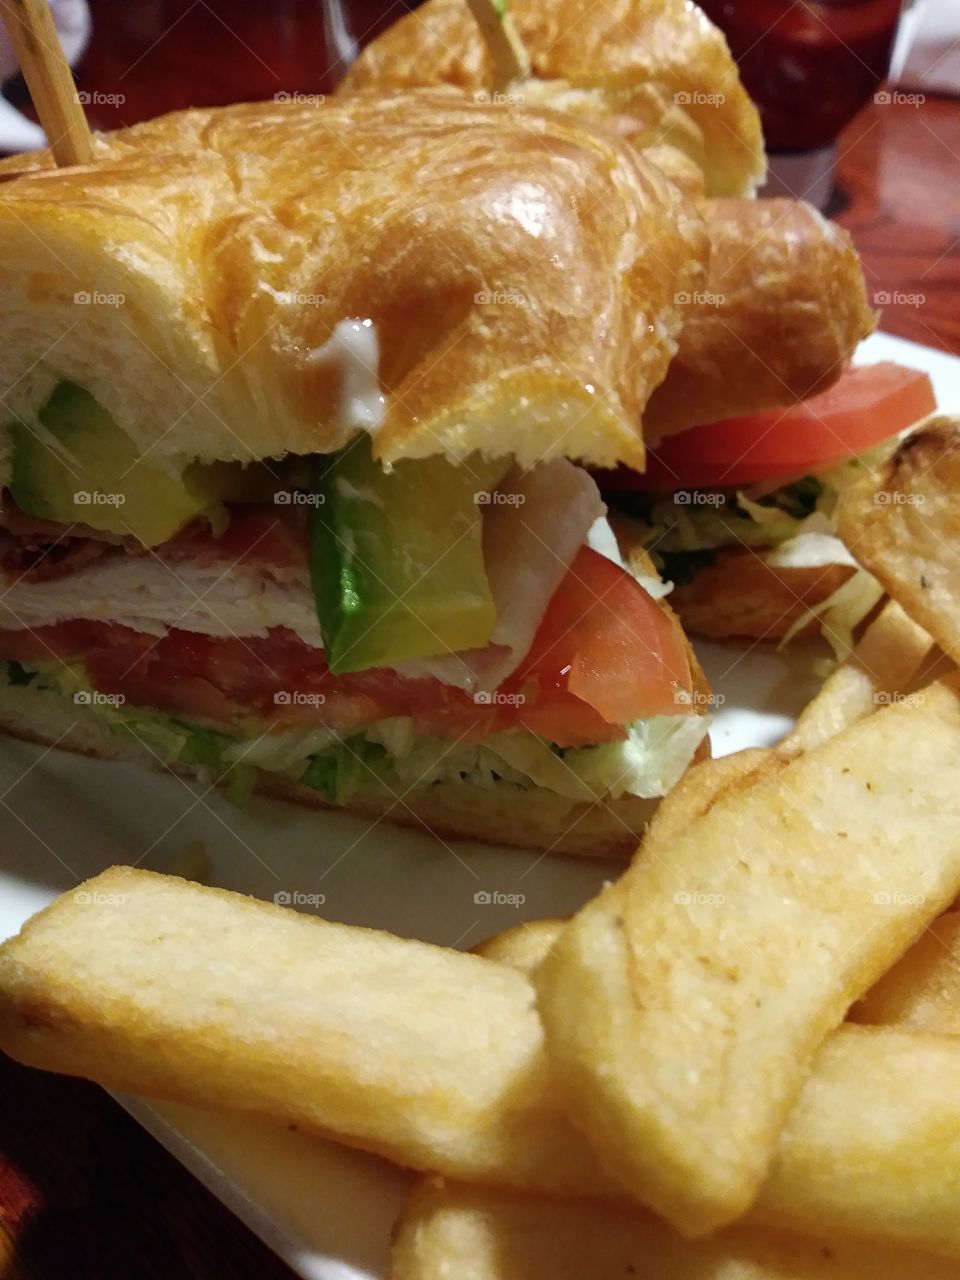 BLTA and Fries